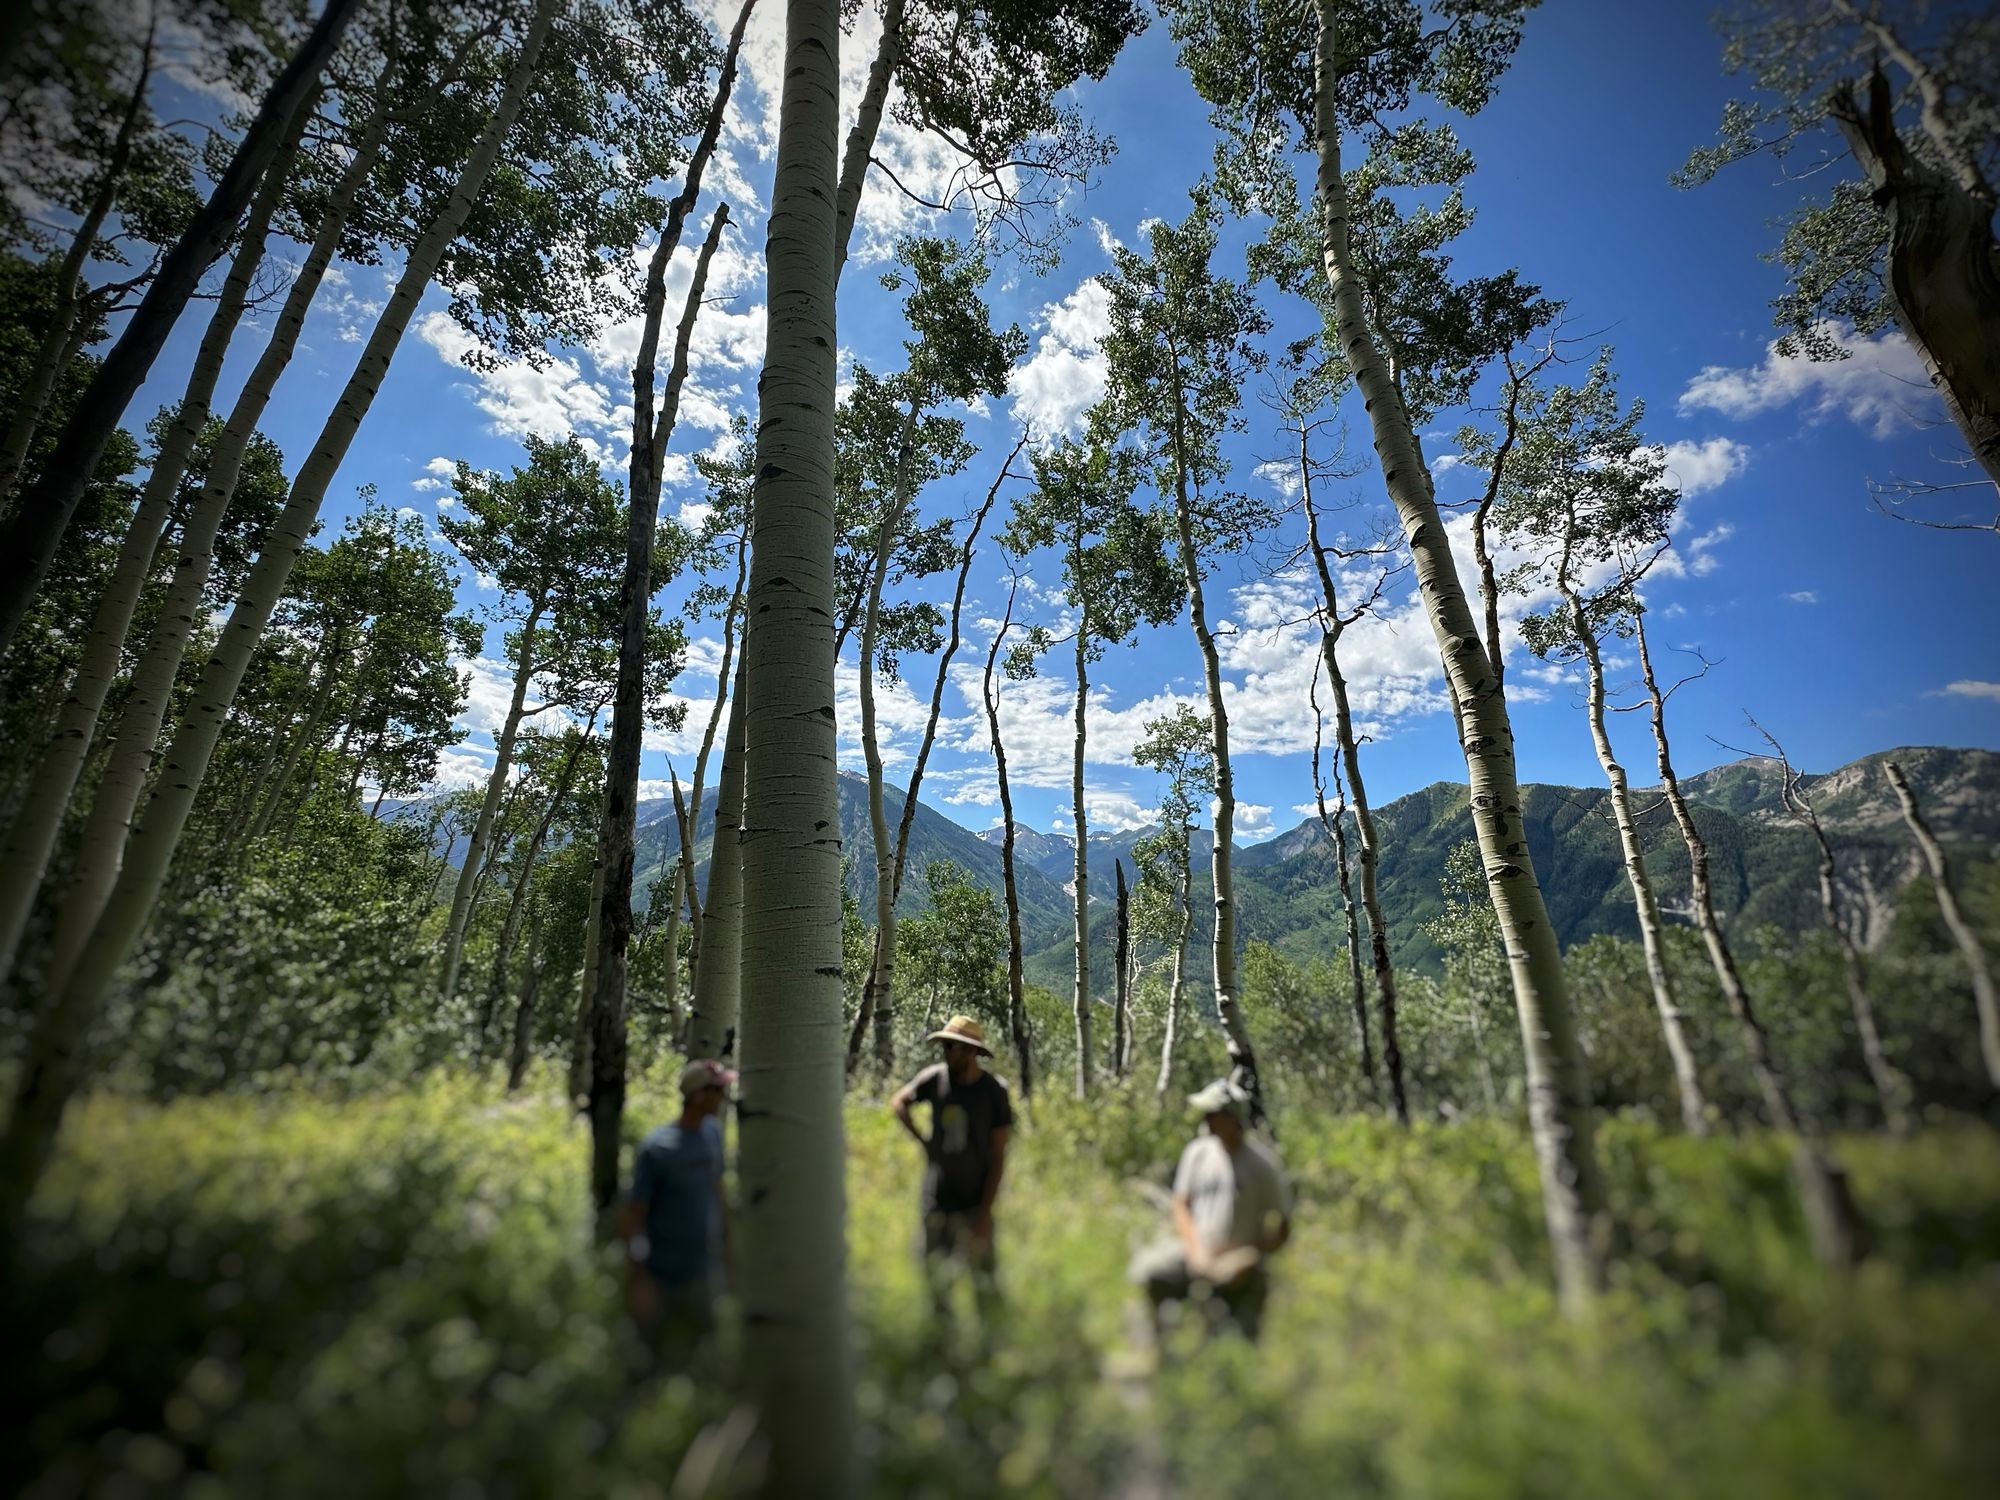 Three figures stand in an aspen grove in summer with high green grass, blue sky and rugged green mountains in the background